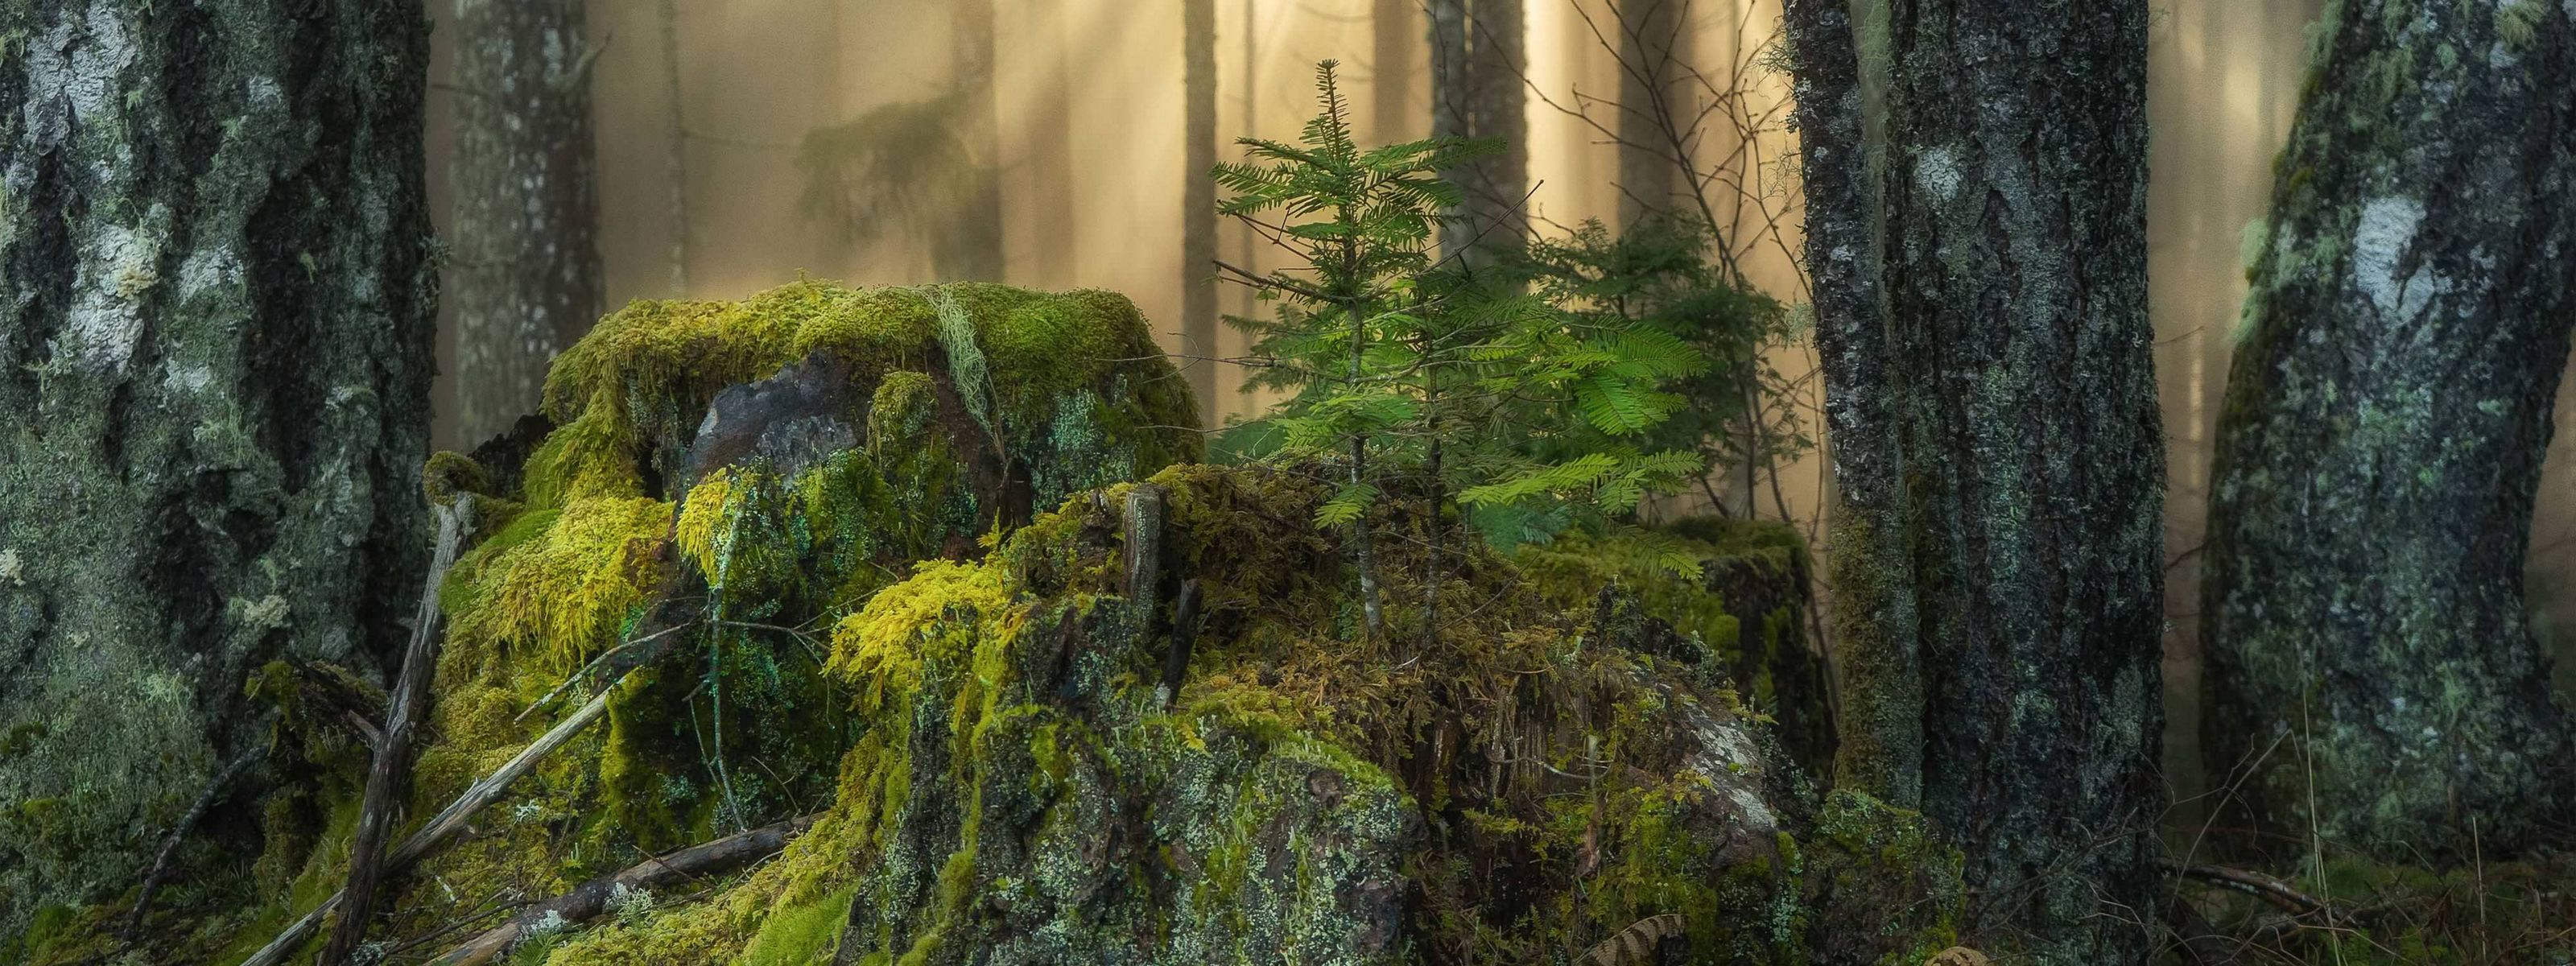 Sunlight beams through trees in a forest with moss covering rocks in the foreground.